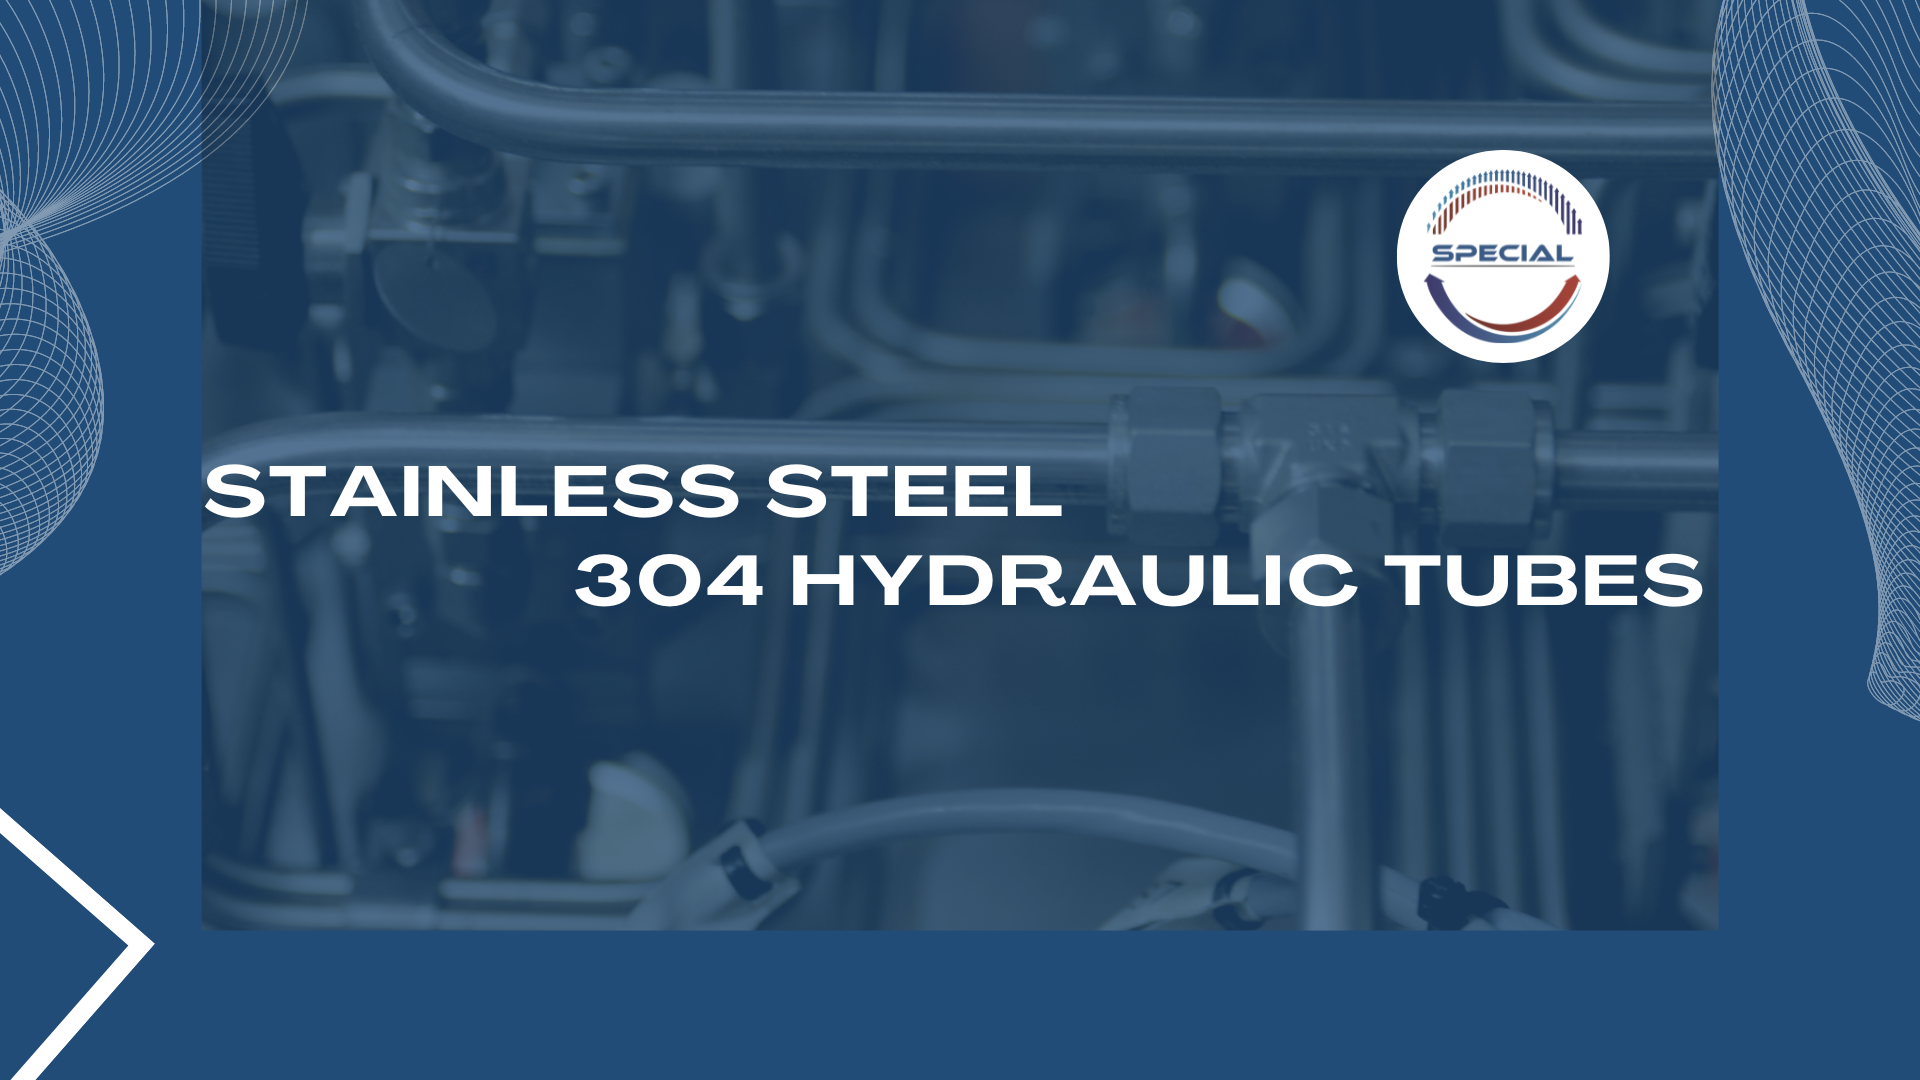 Stainless steel 304 hydraulic tubes